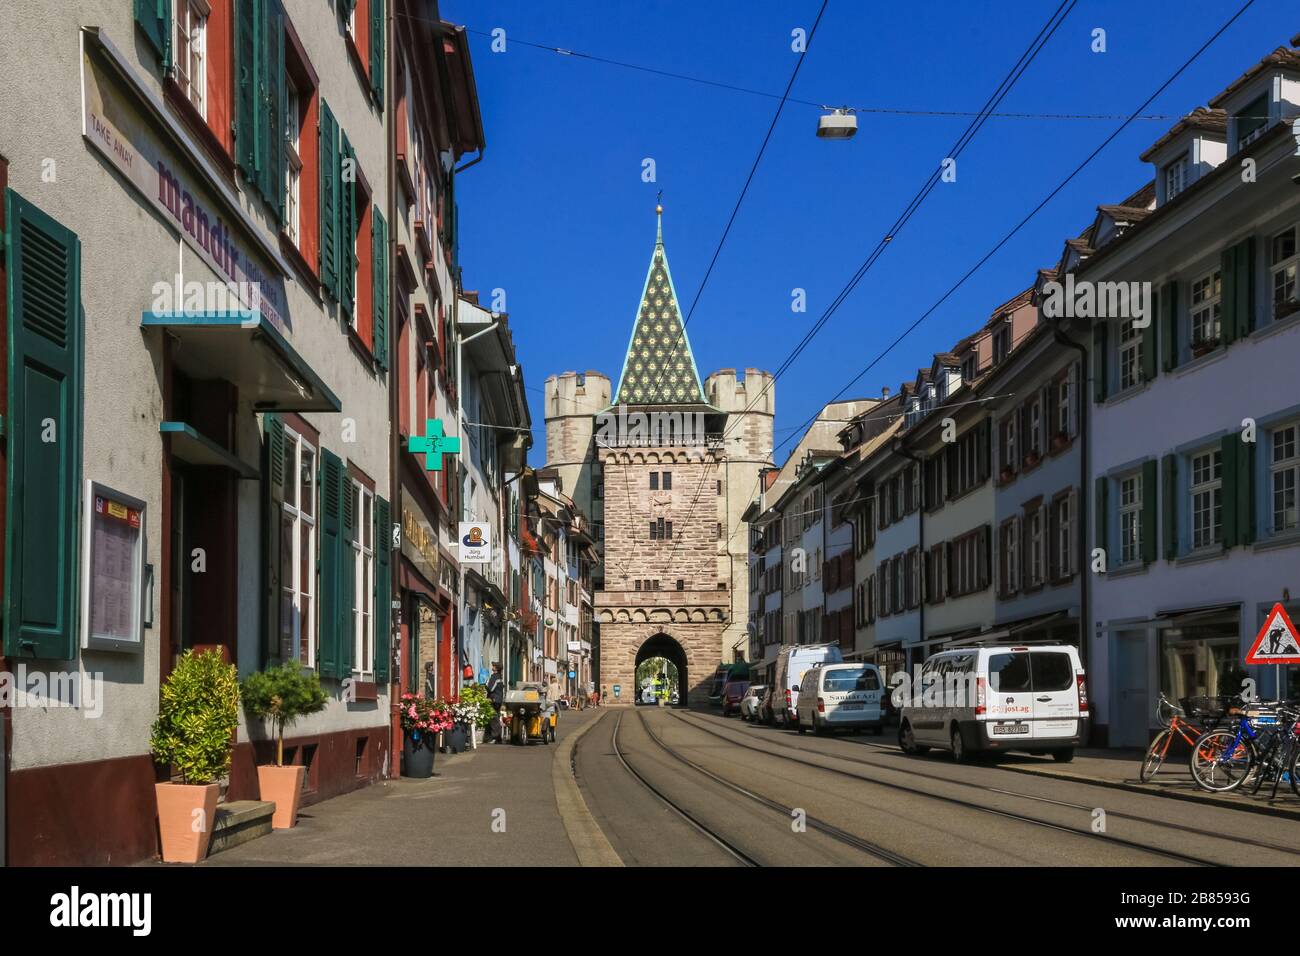 Nice view of the street Spalenvorstadt in Basel, leading to the gate Spalentor. Its square main tower, flanked on each side by two round towers, is a... Stock Photo